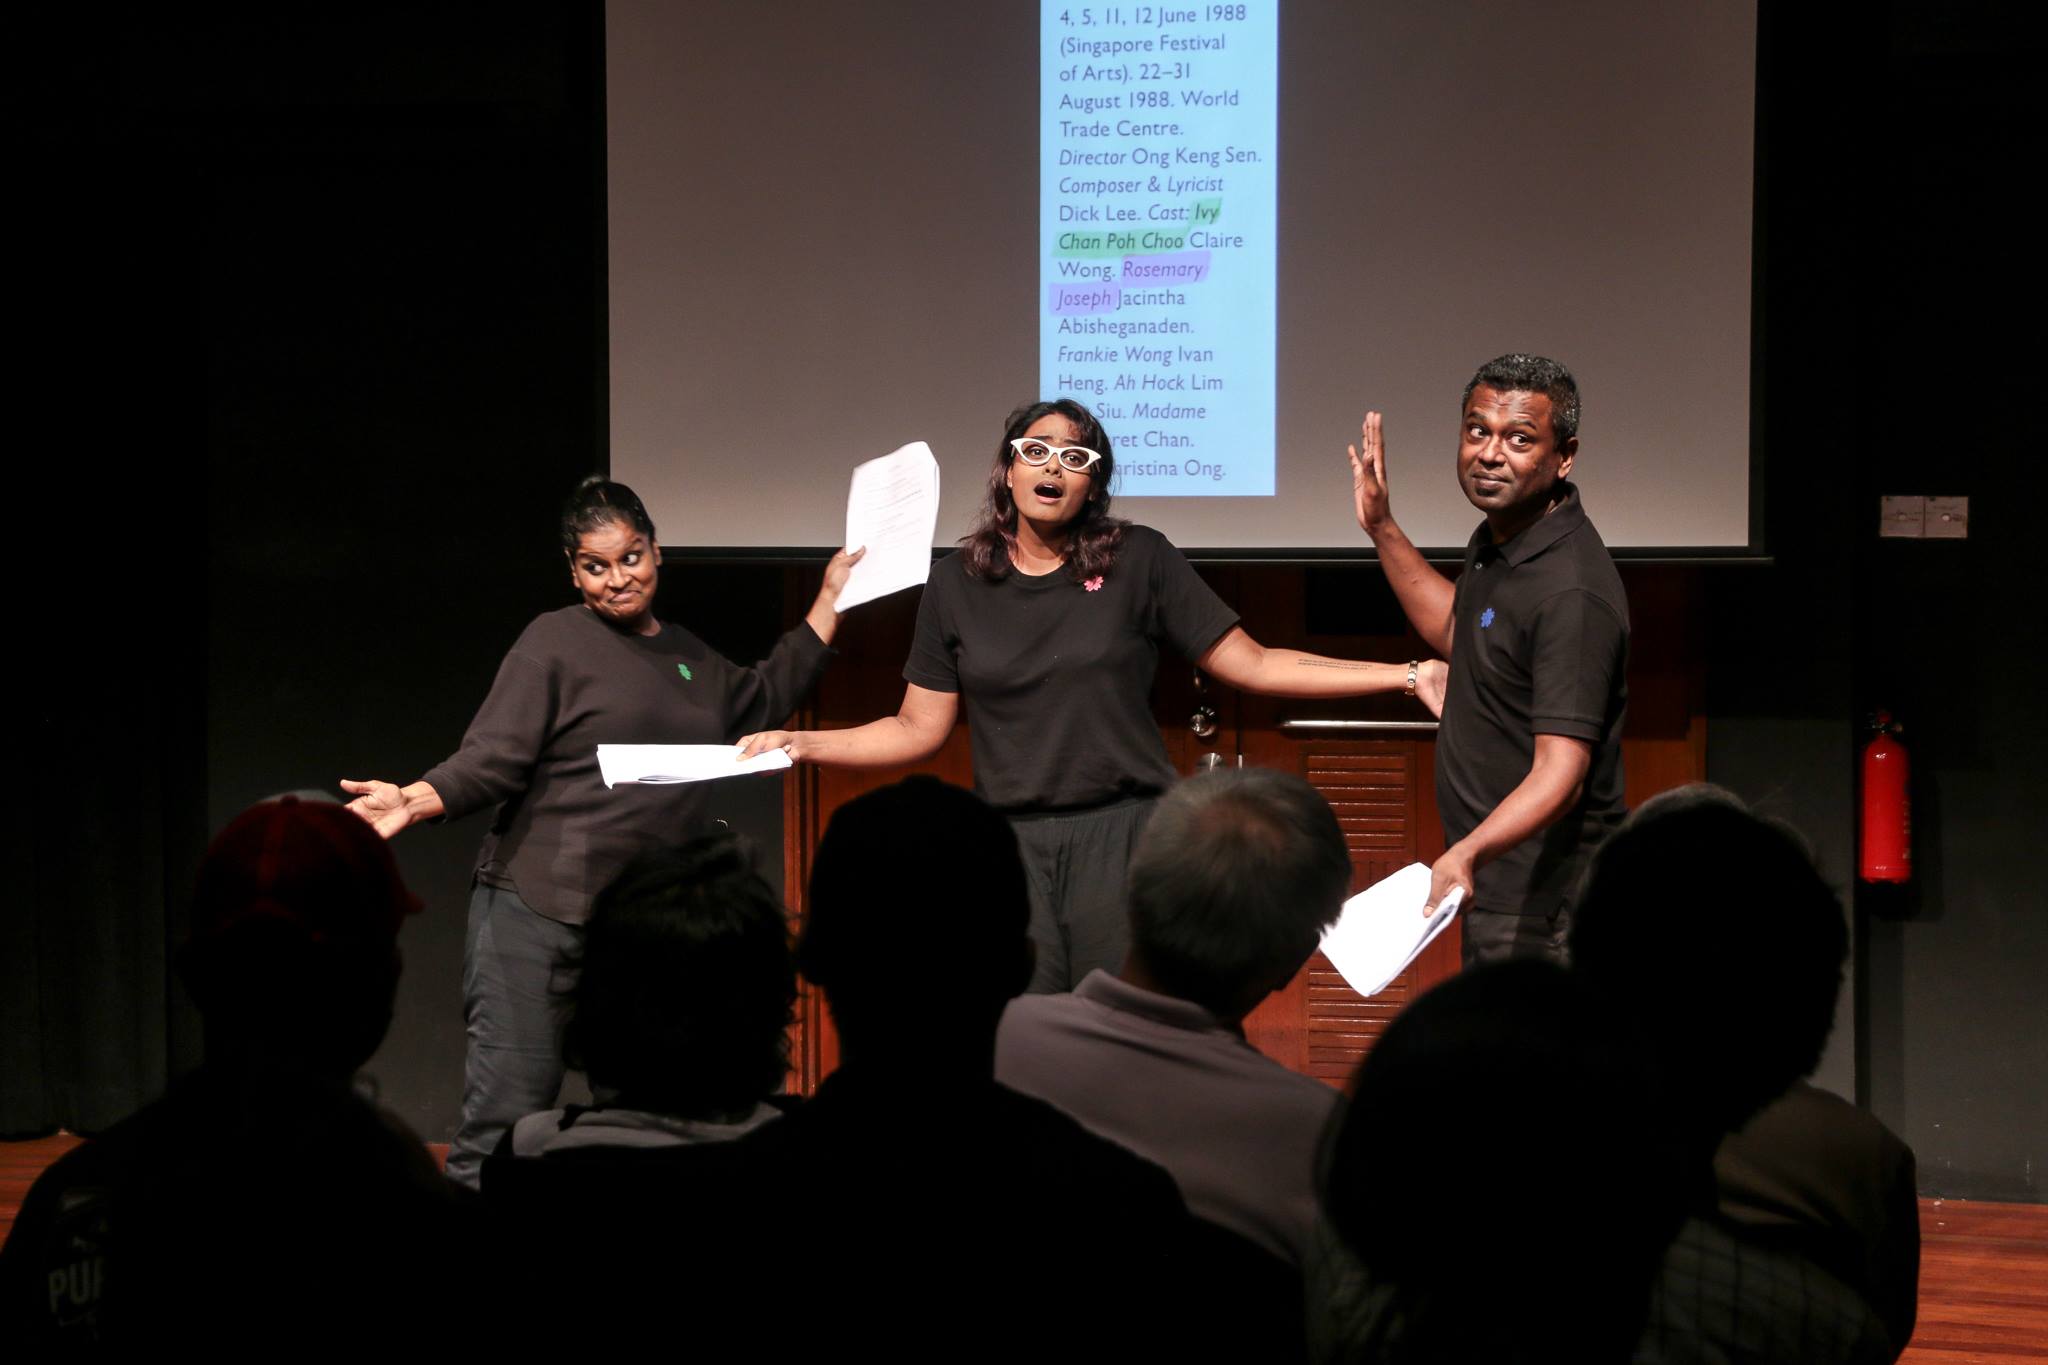 The image features three performers with various facial expressions posing in front of the audience.